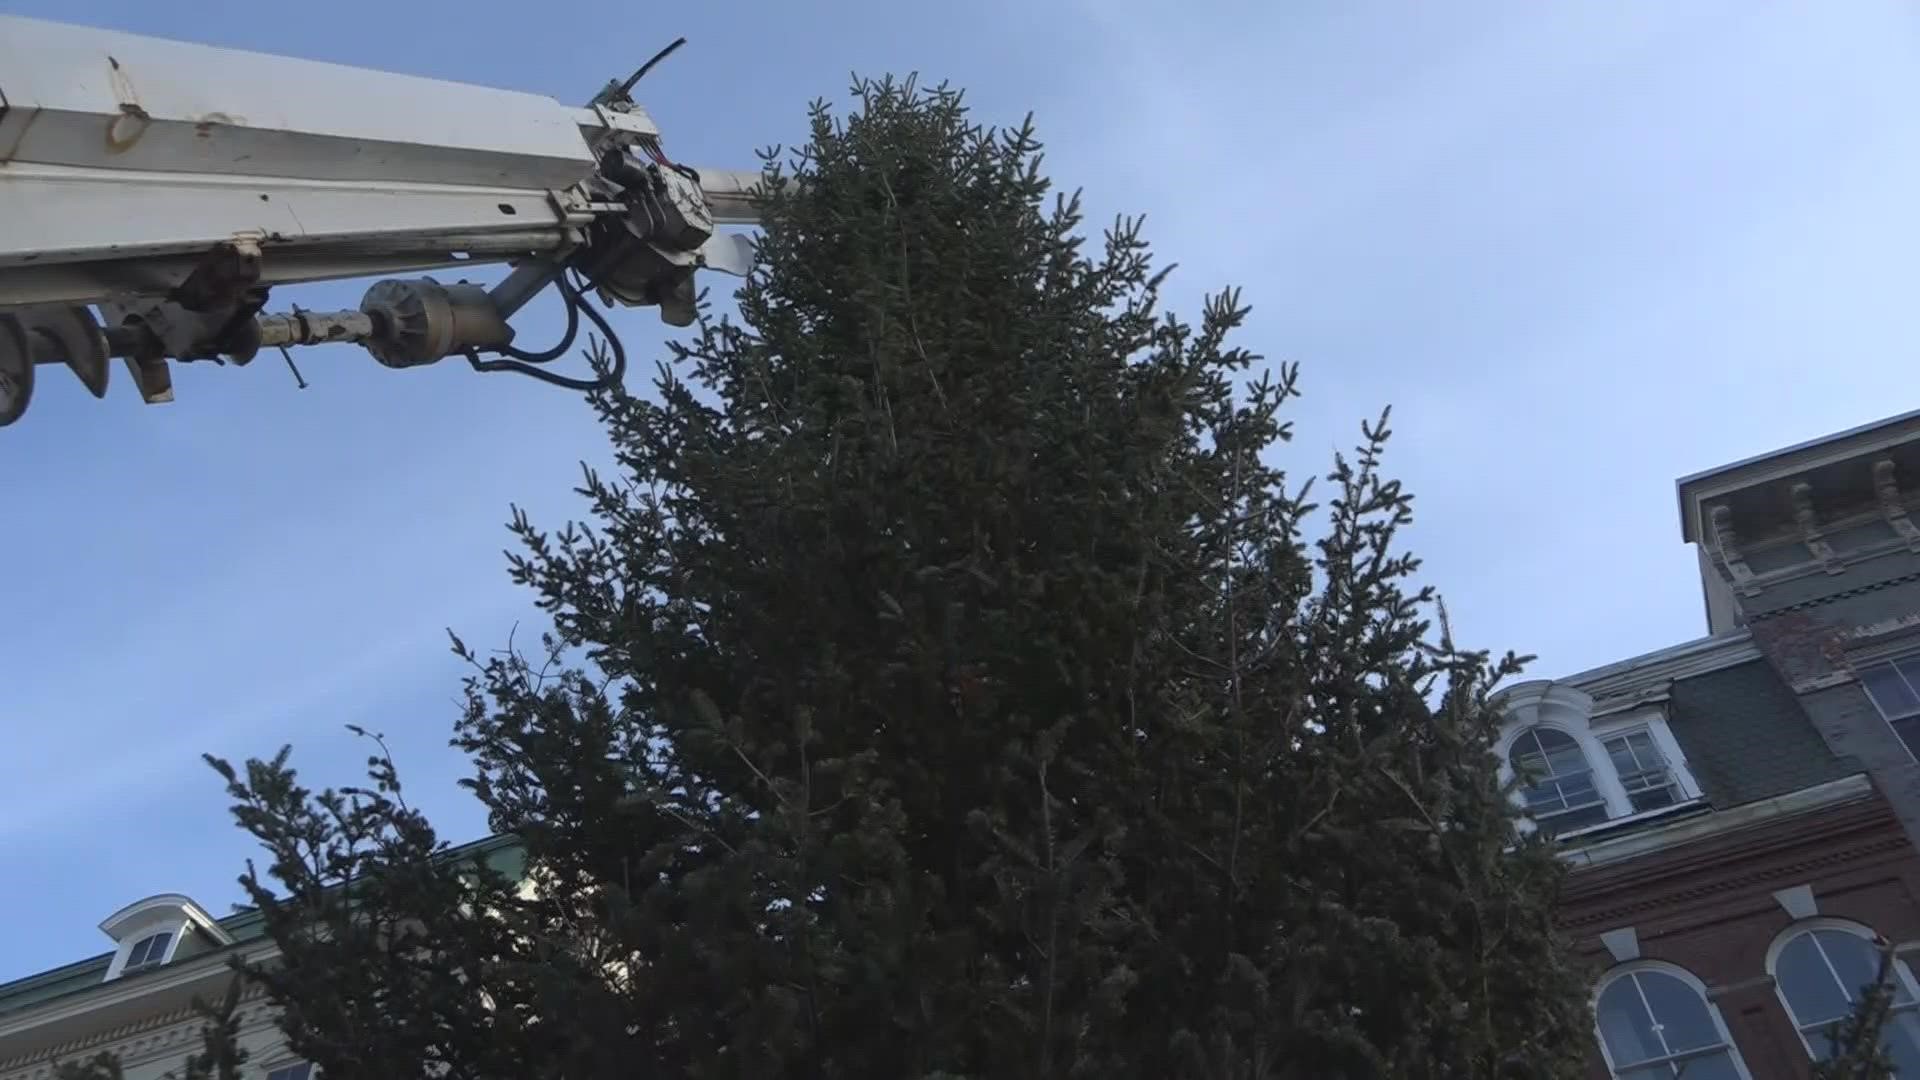 The 35-foot Balsam fir tree was delivered and setup in West Market Square this morning.